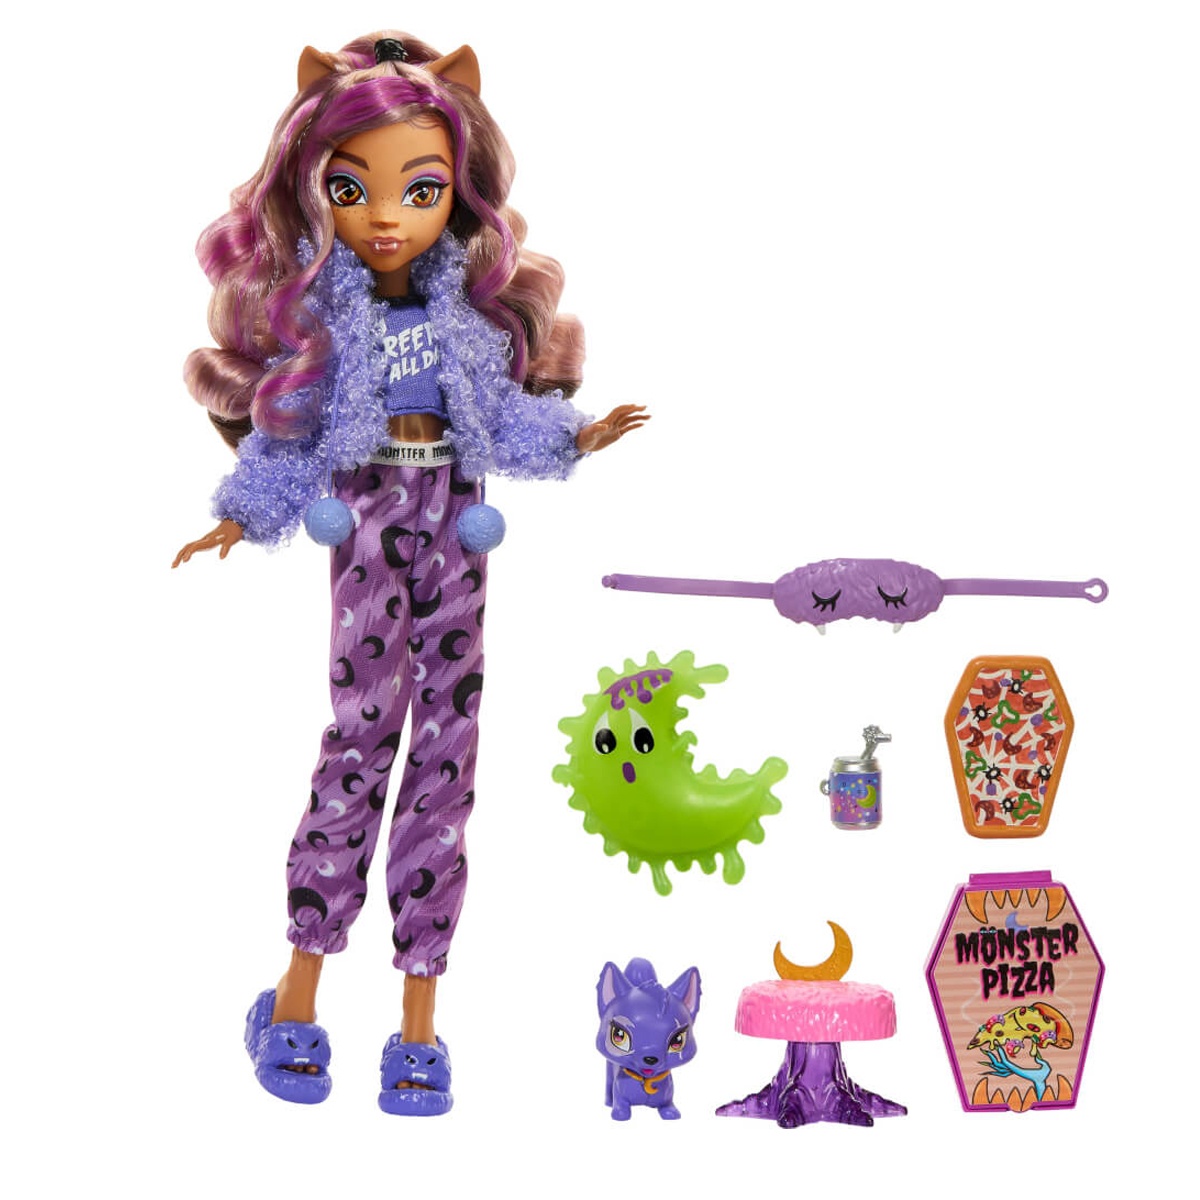 Monster High Creepover Party Clawdeen Wolf